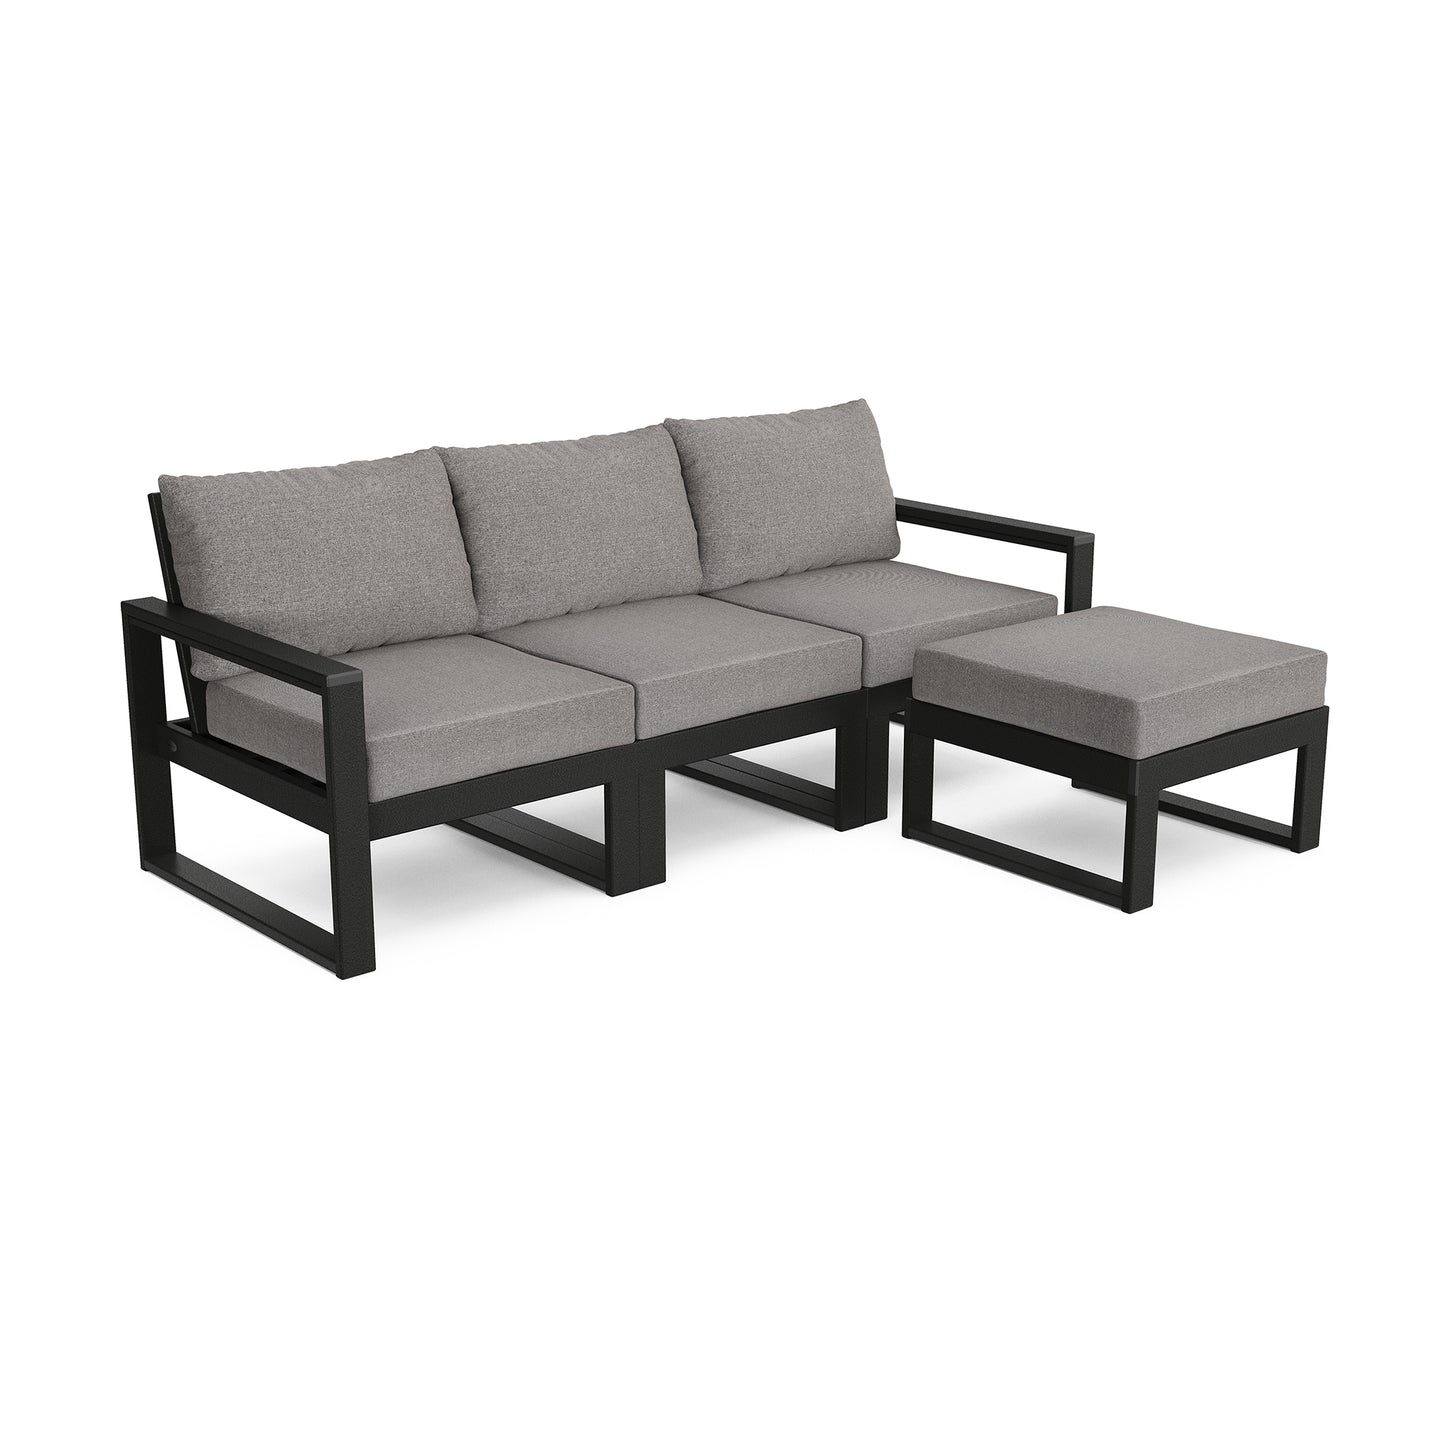 A black POLYWOOD sectional sofa with grey cushions and ottoman, perfect for outdoor furniture.